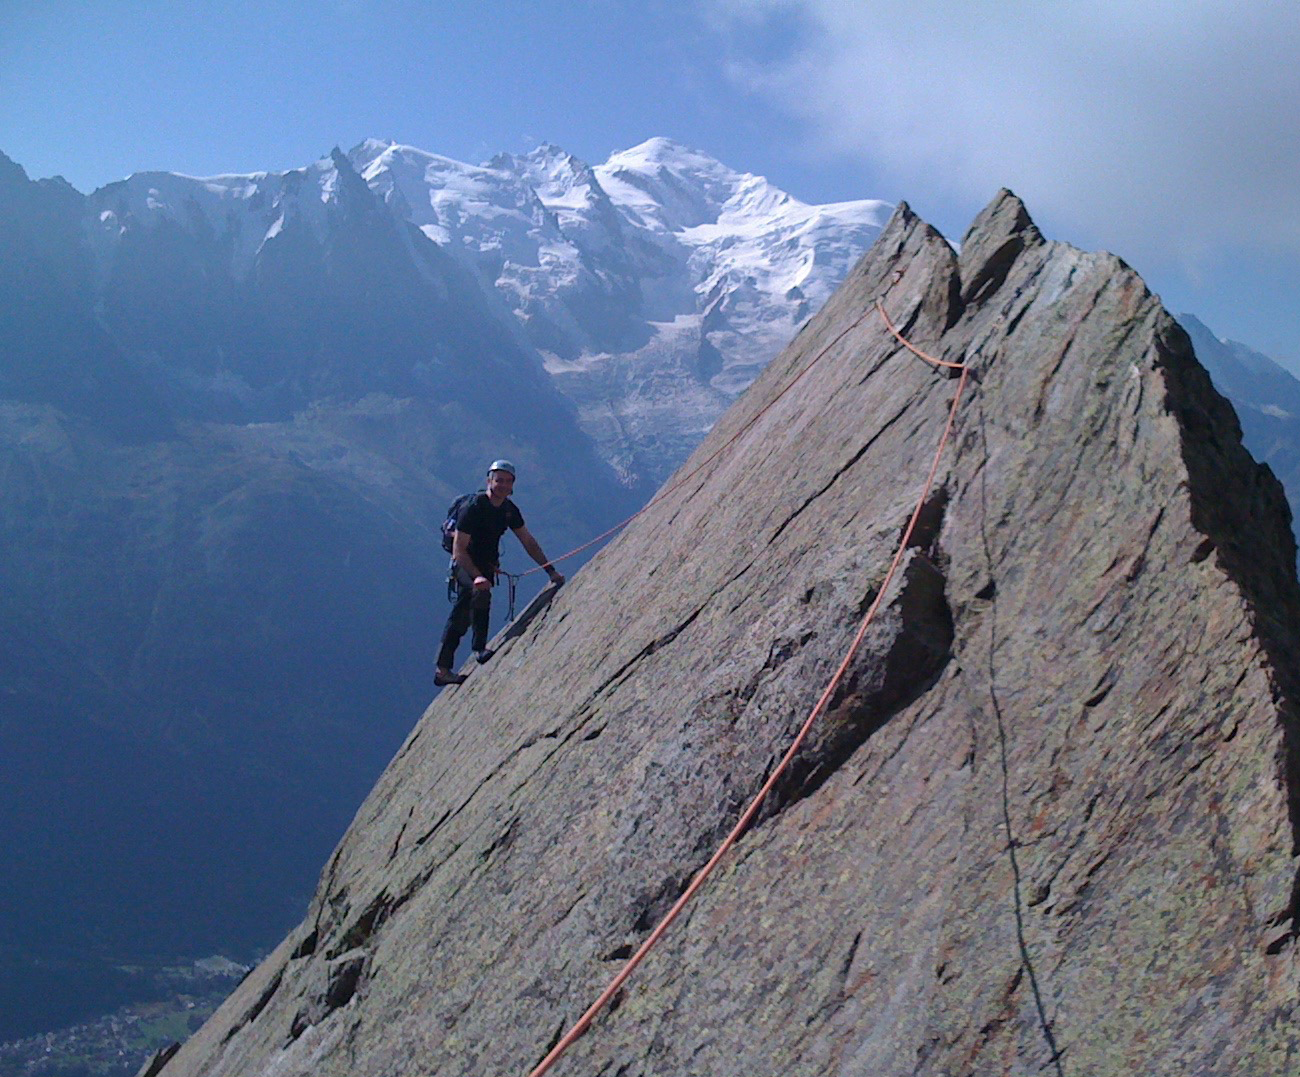 Climber standing on mountain with view of Mont Blanc